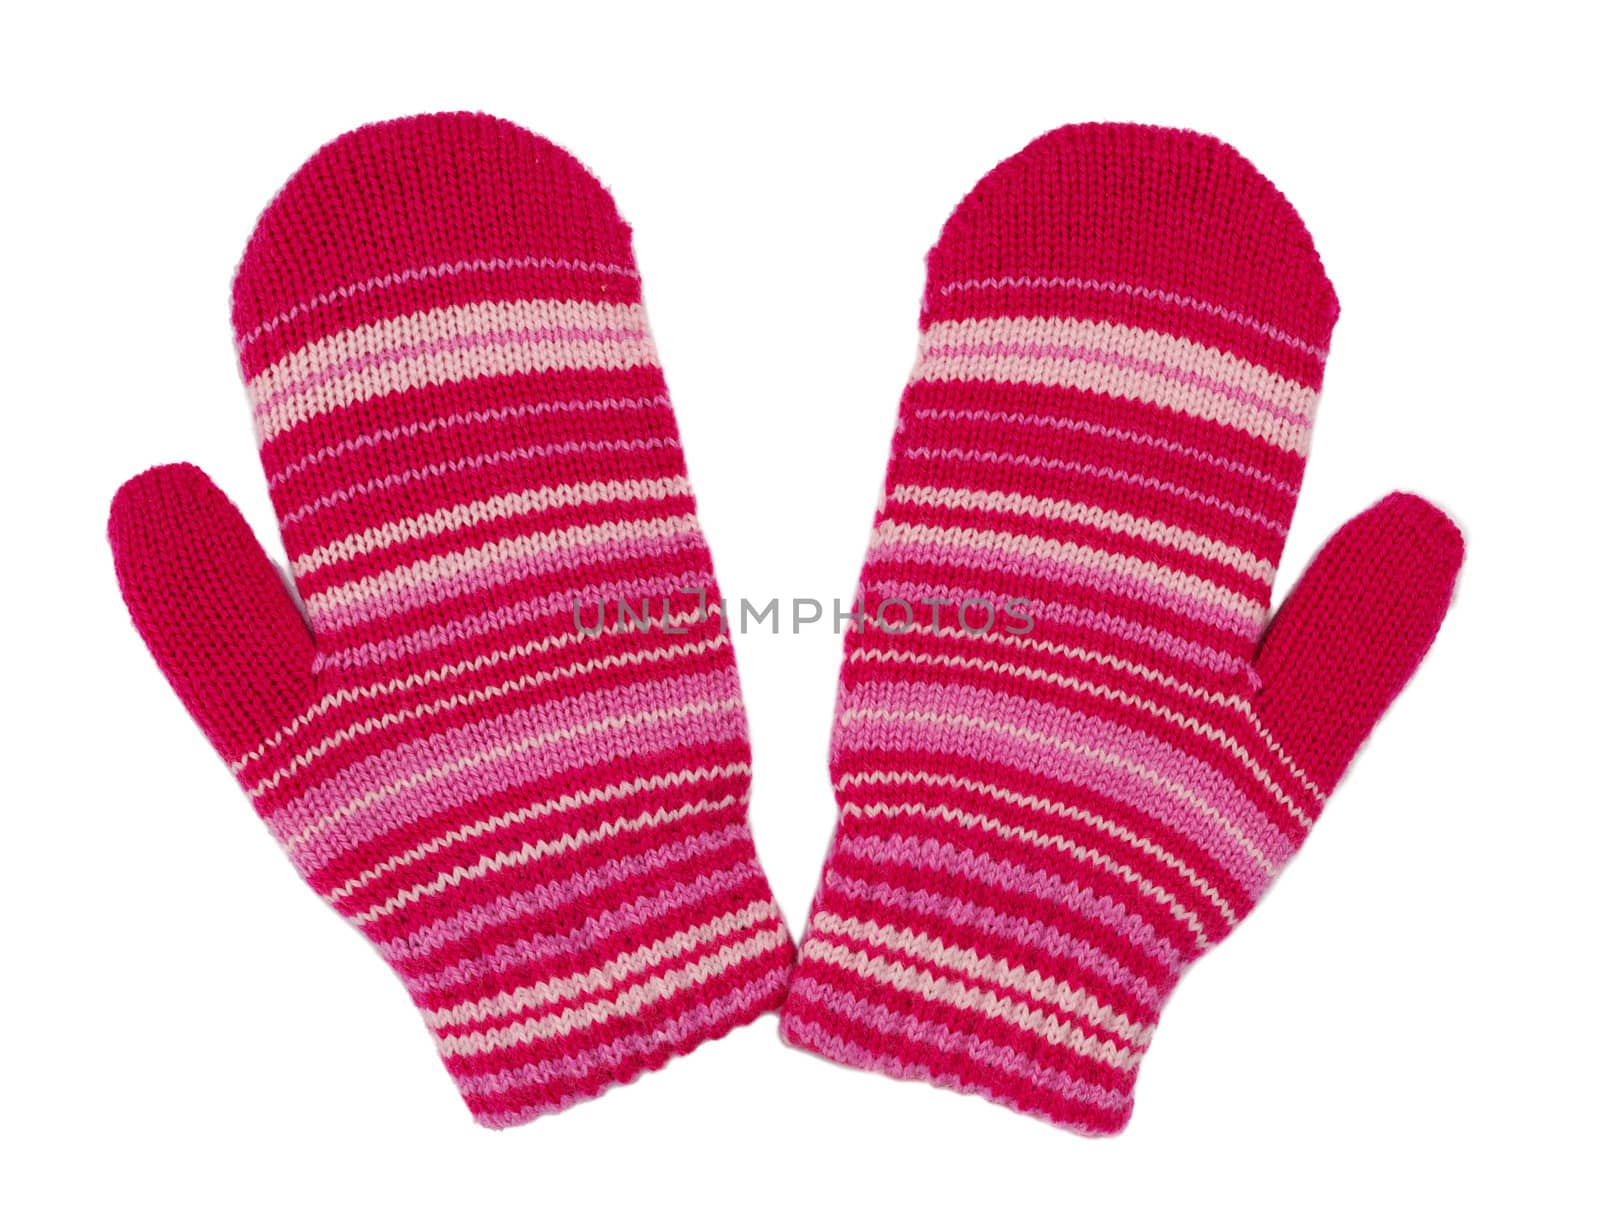 pair of red striped mittens by RuslanOmega